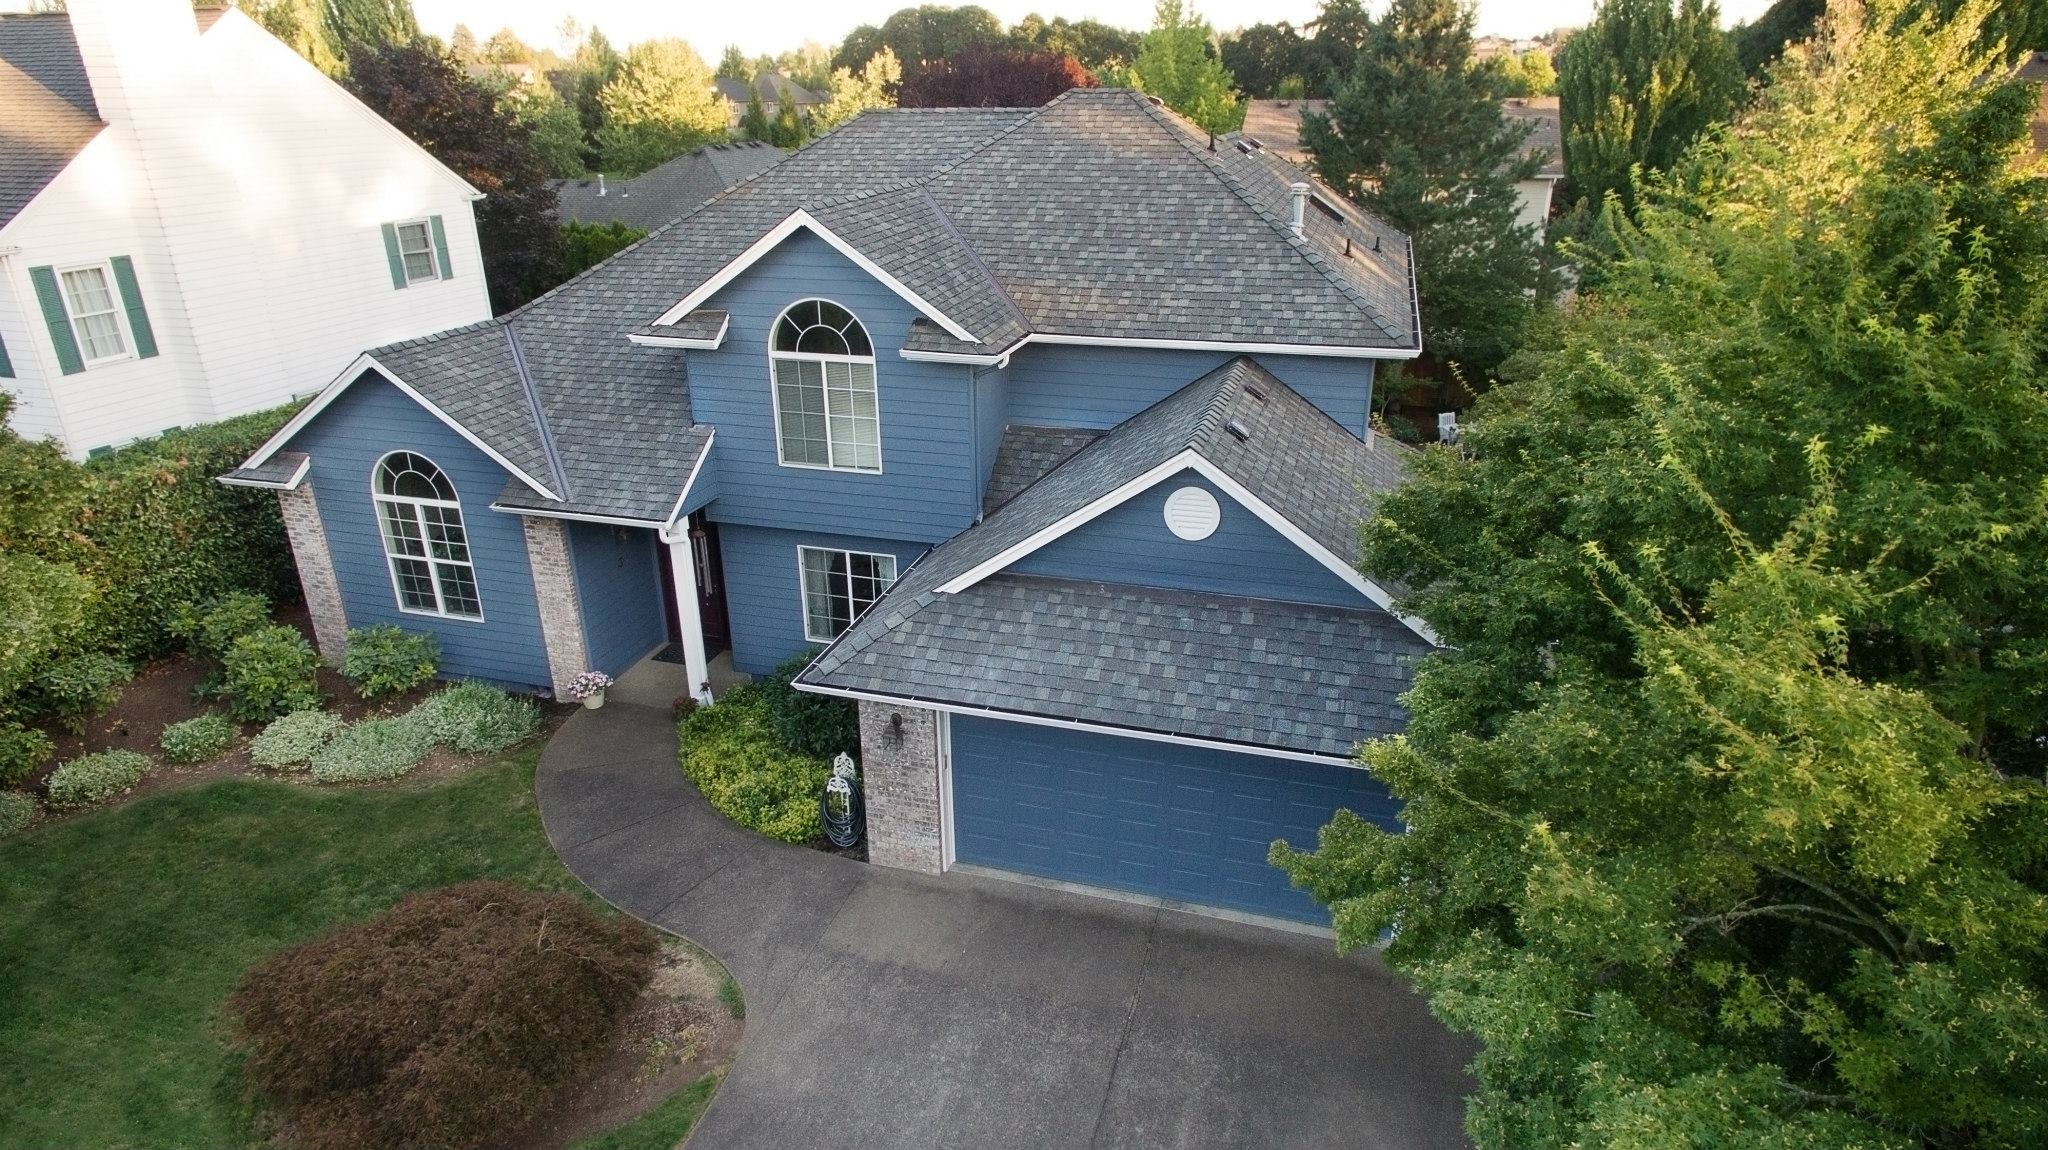 VALLEY ROOFING did the roof and gutters on this home in Oregon